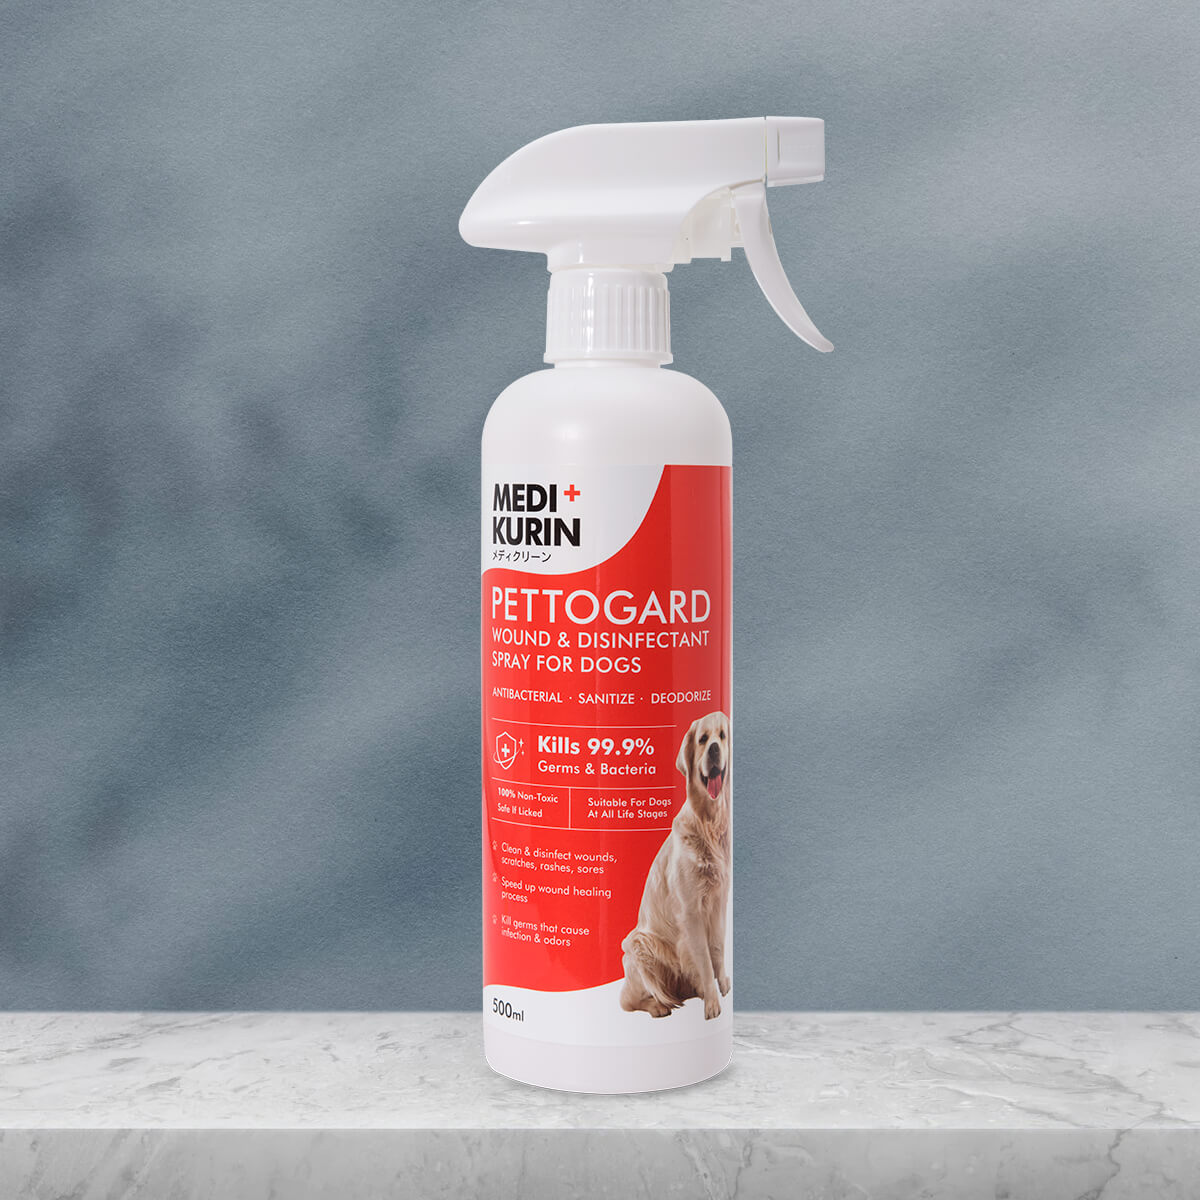 PettoGard Wound & Disinfectant Spray for Dogs | MEDIKURIN